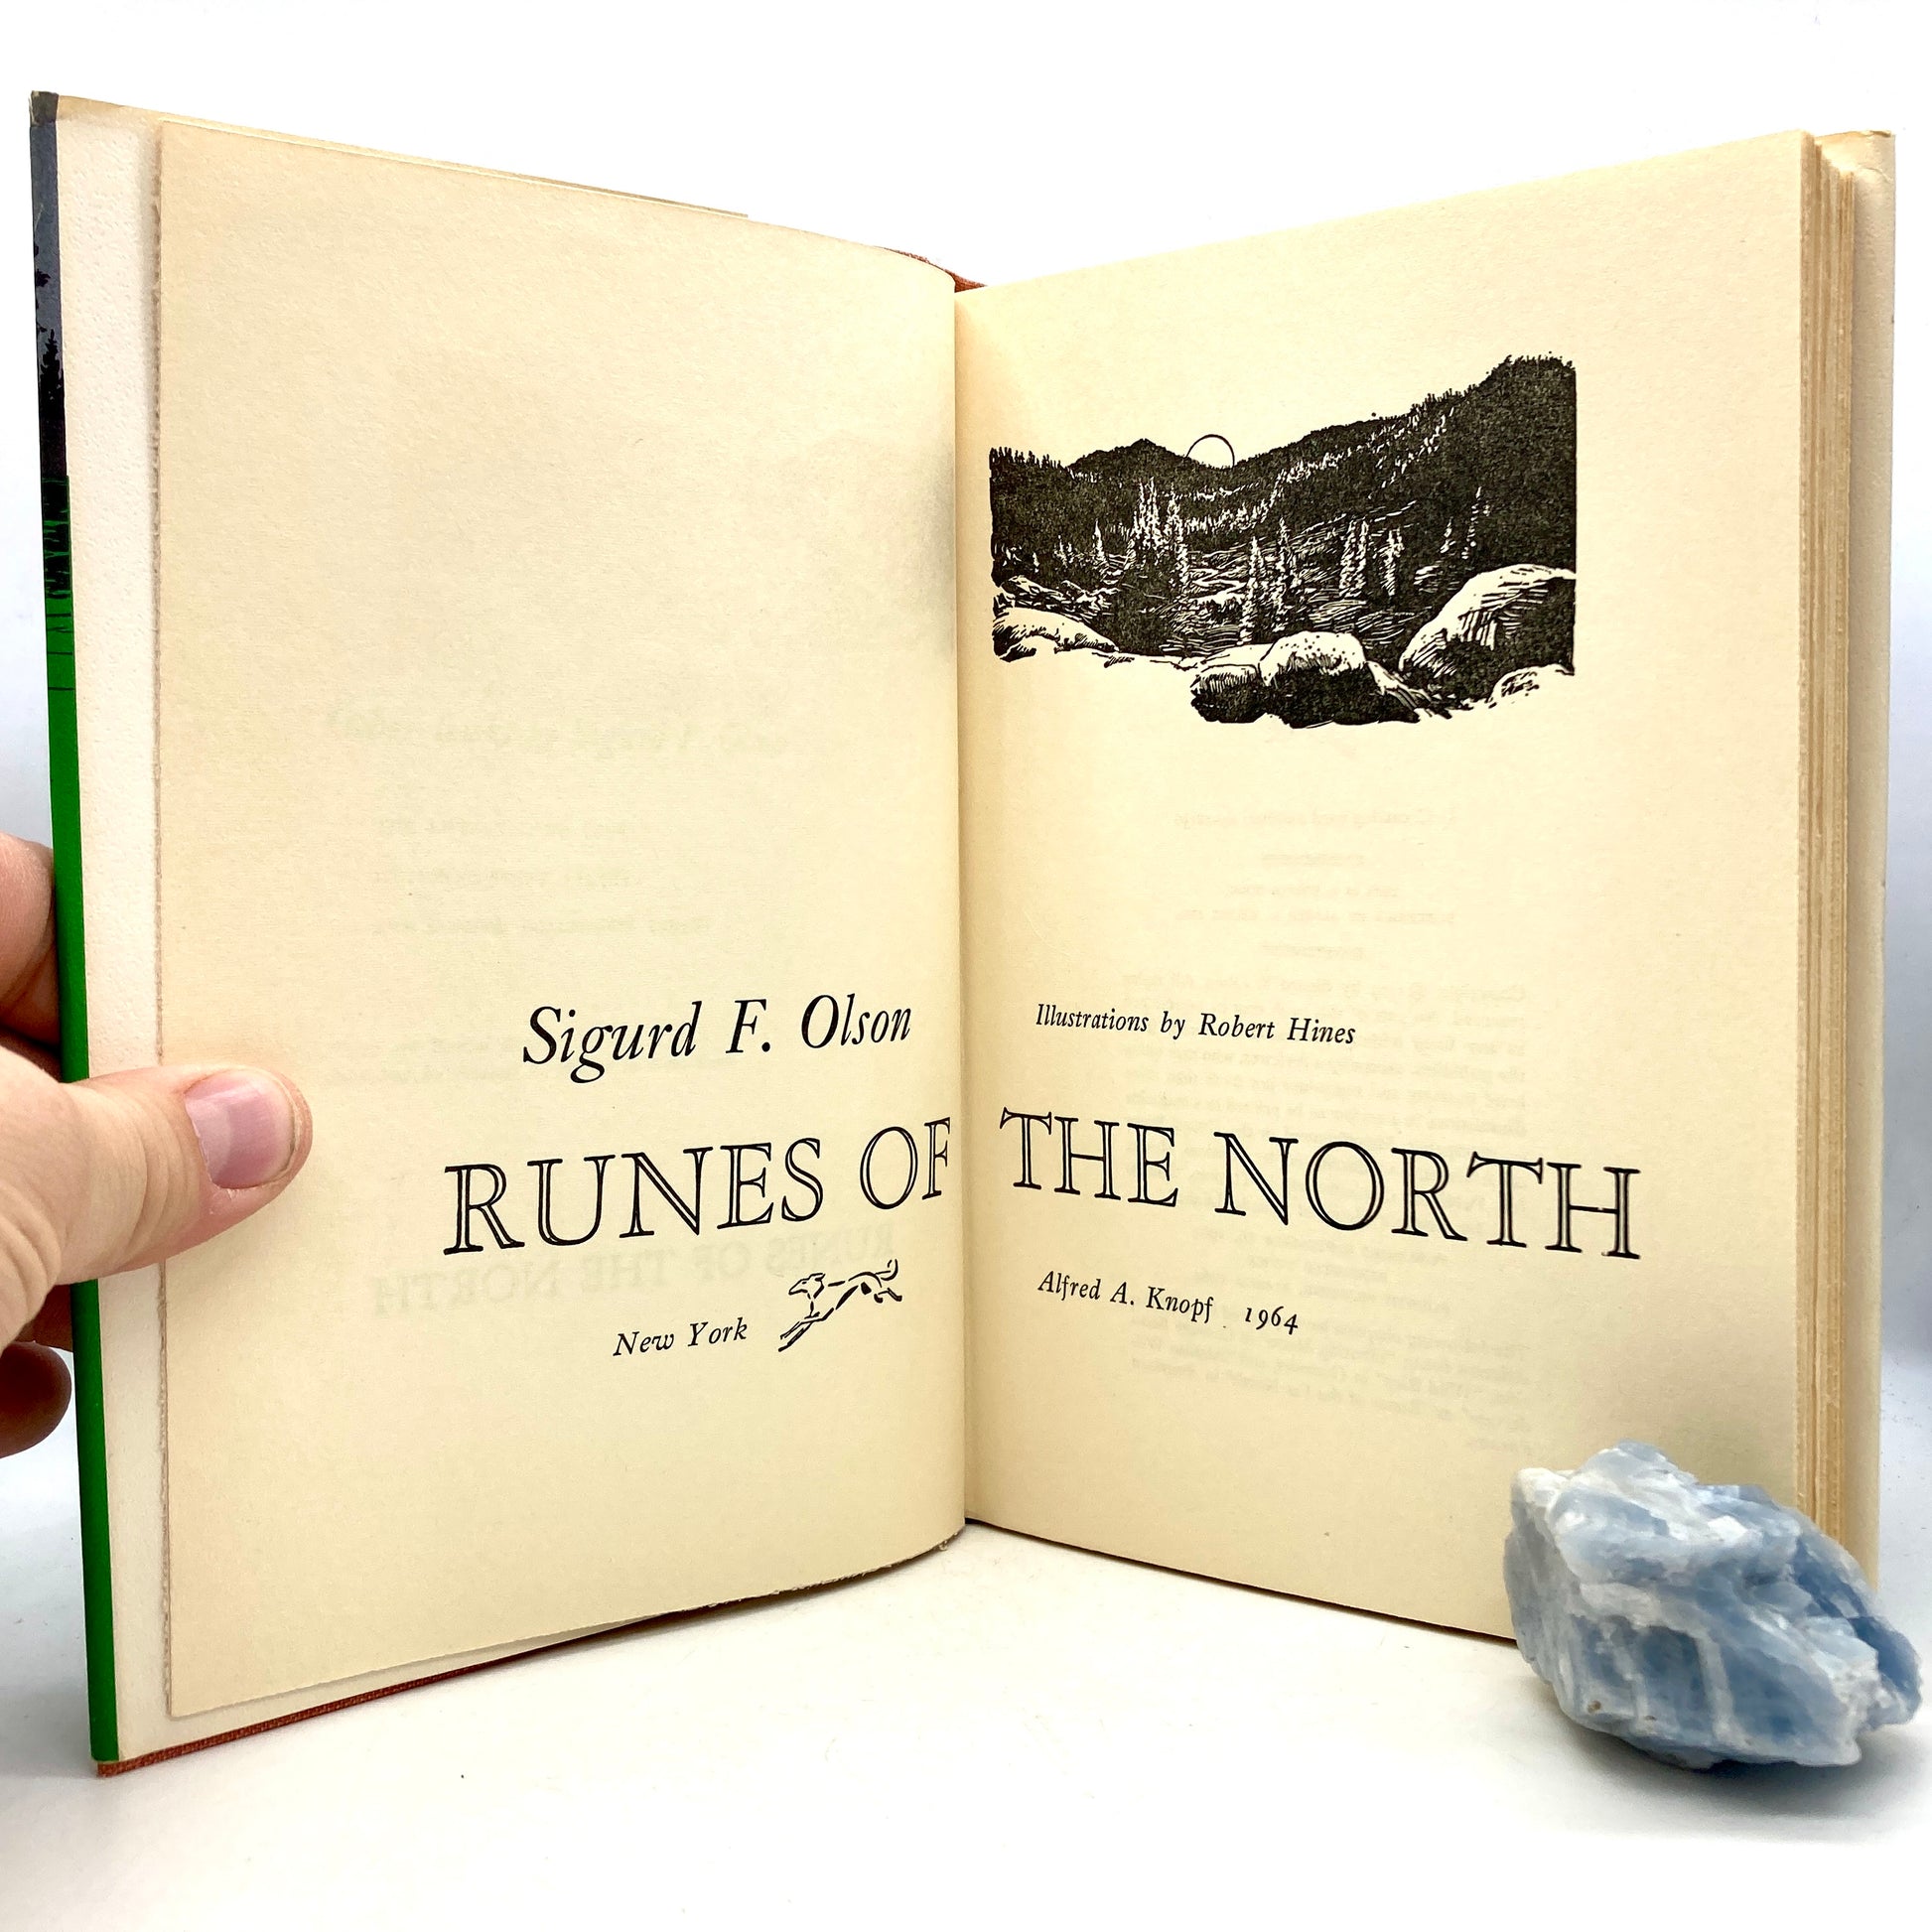 OLSON, Sigurd F. "Runes of the North" [Alfred A. Knopf, 1964] - Buzz Bookstore